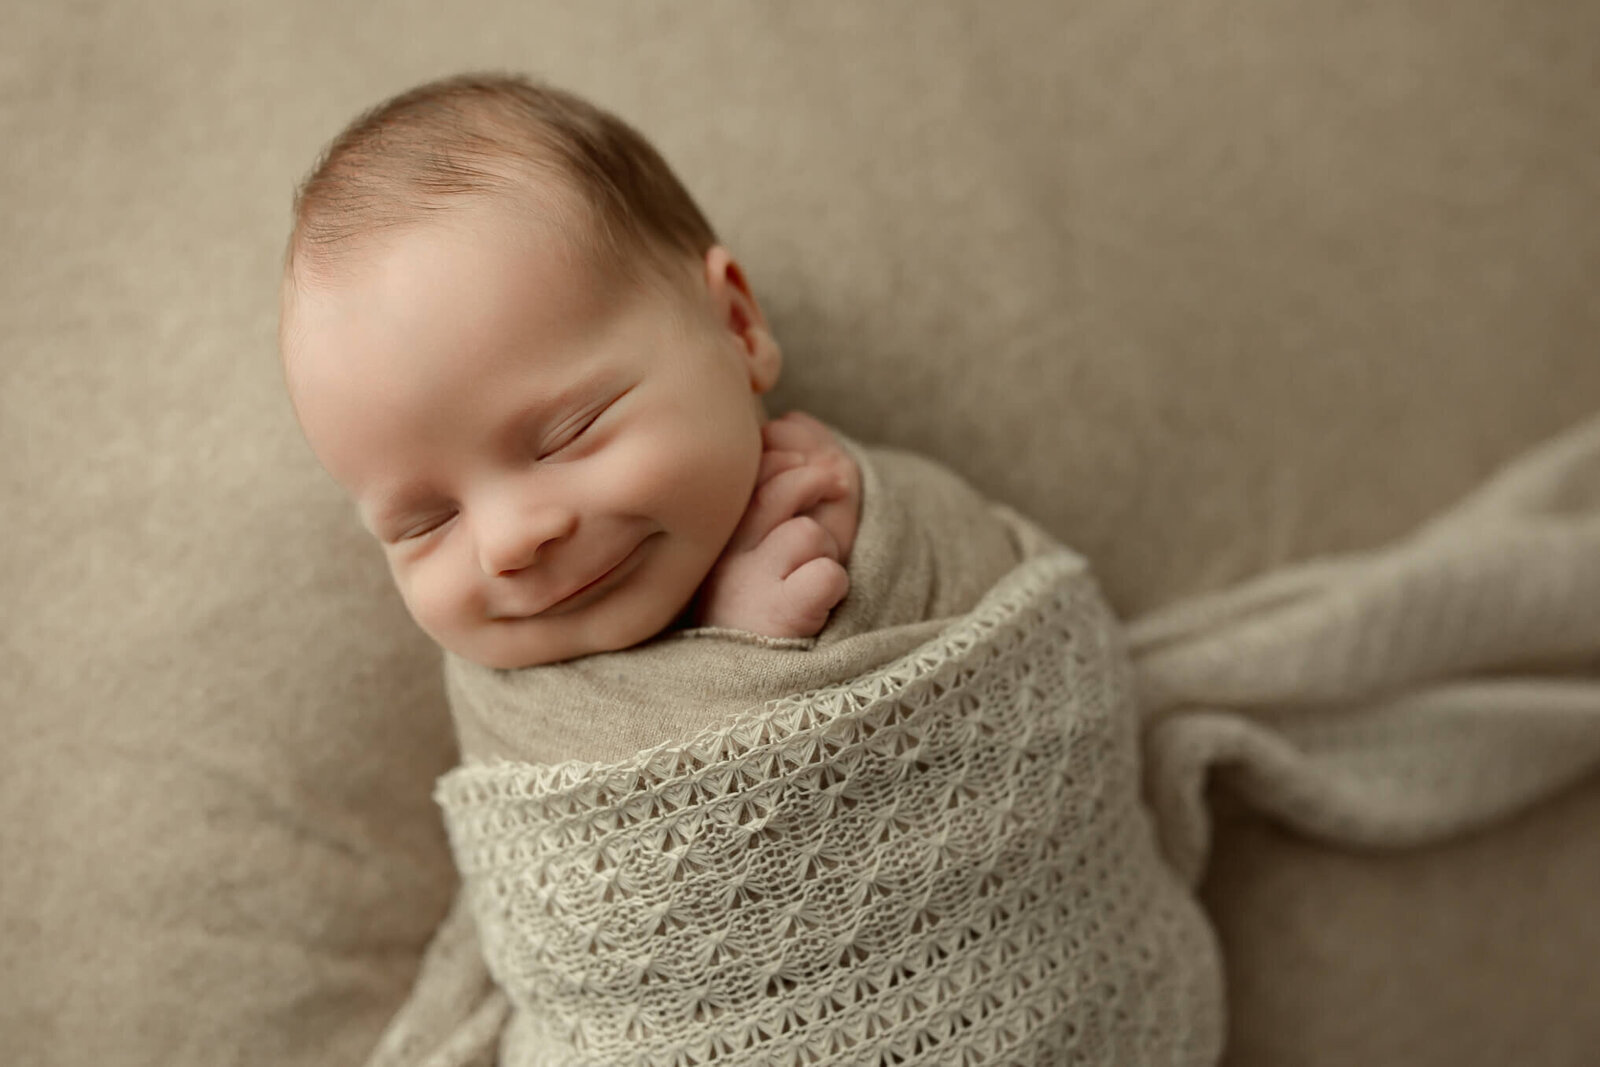 Baby boy with a smile swaddled in a monochromatic tan set up during his newborn photos